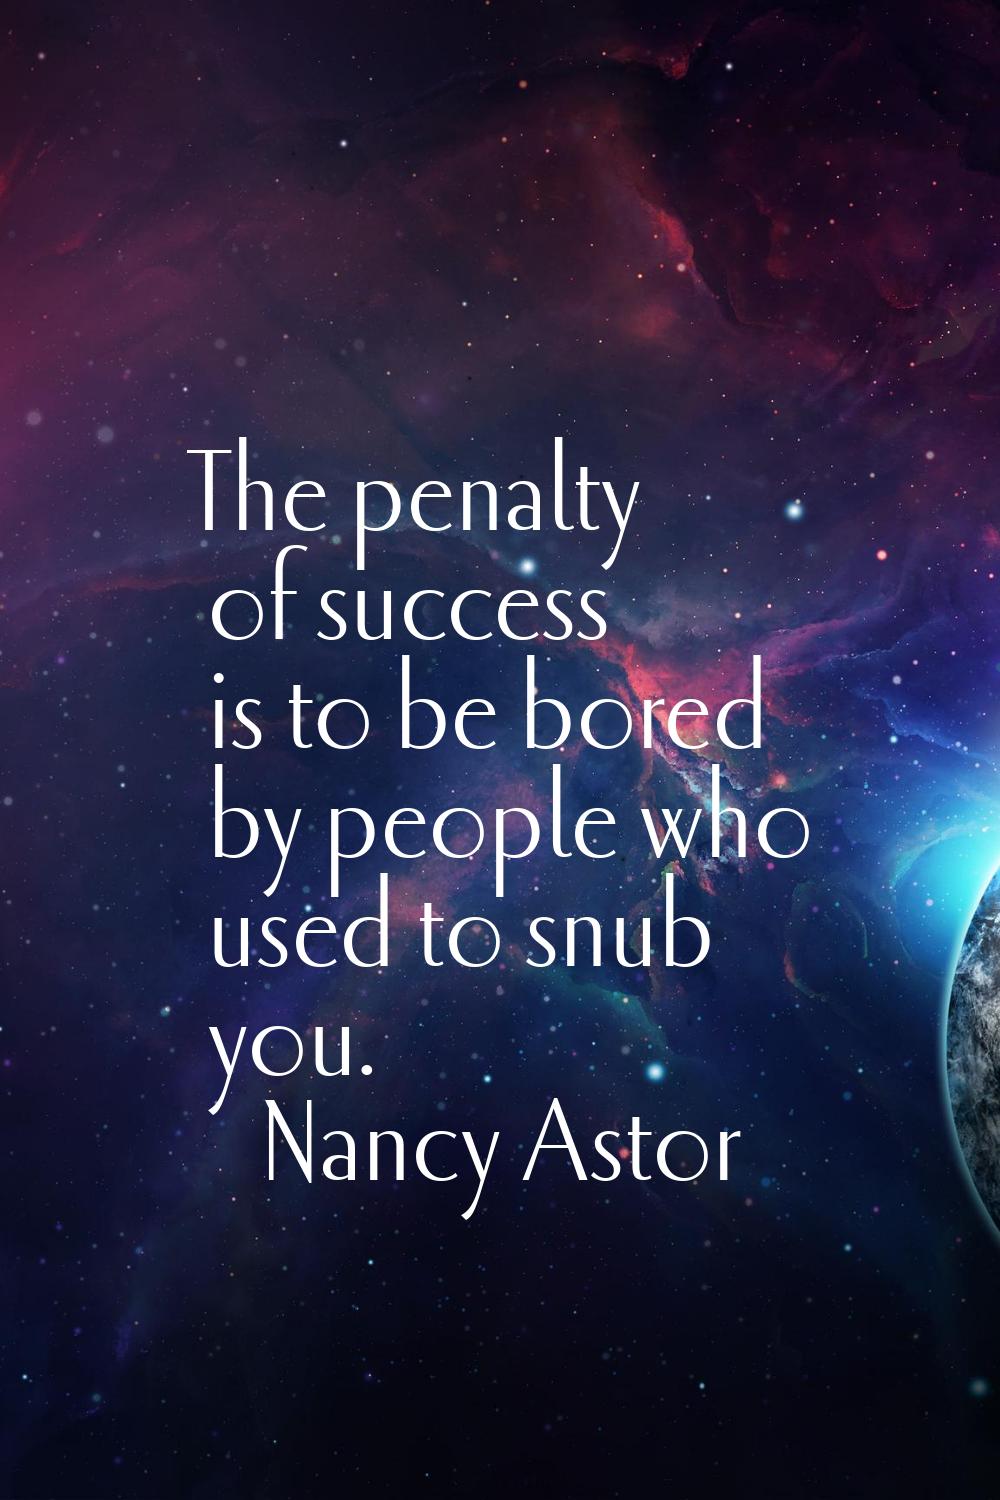 The penalty of success is to be bored by people who used to snub you.